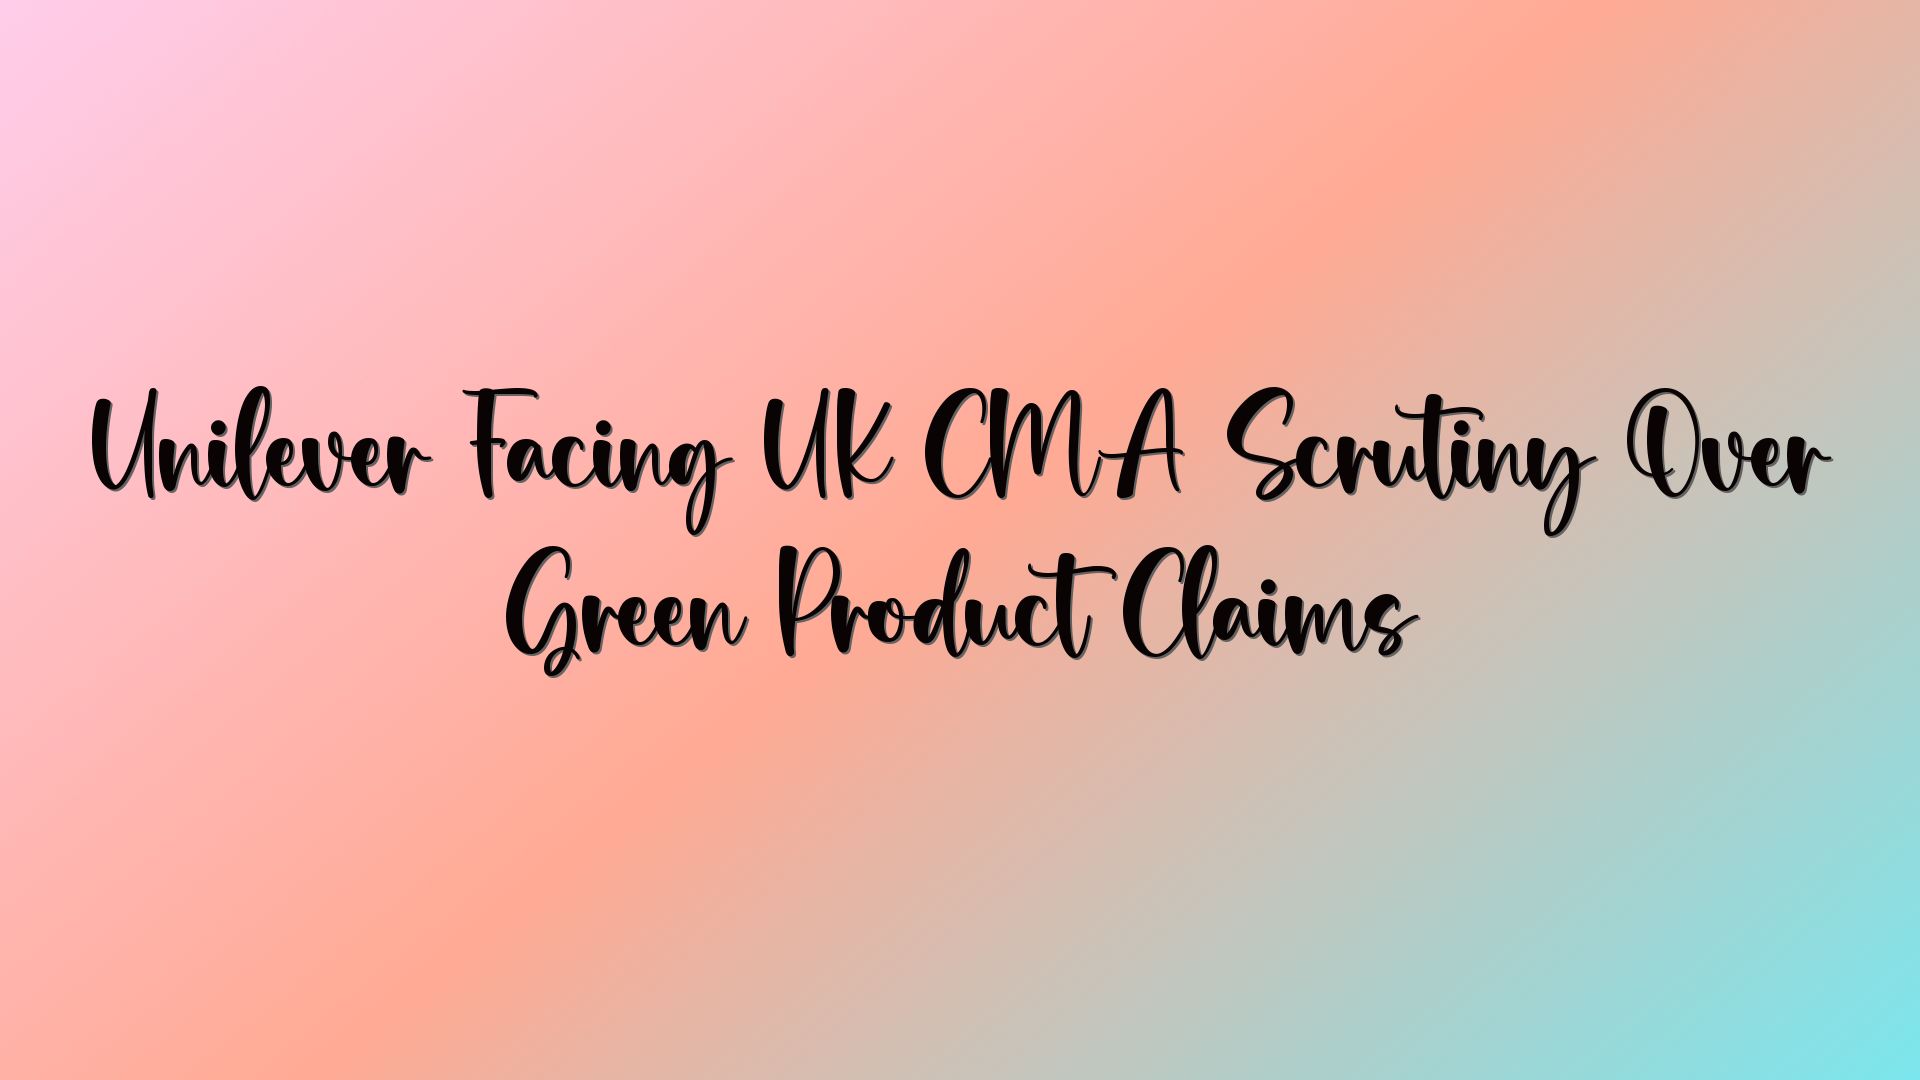 Unilever Facing UK CMA Scrutiny Over Green Product Claims